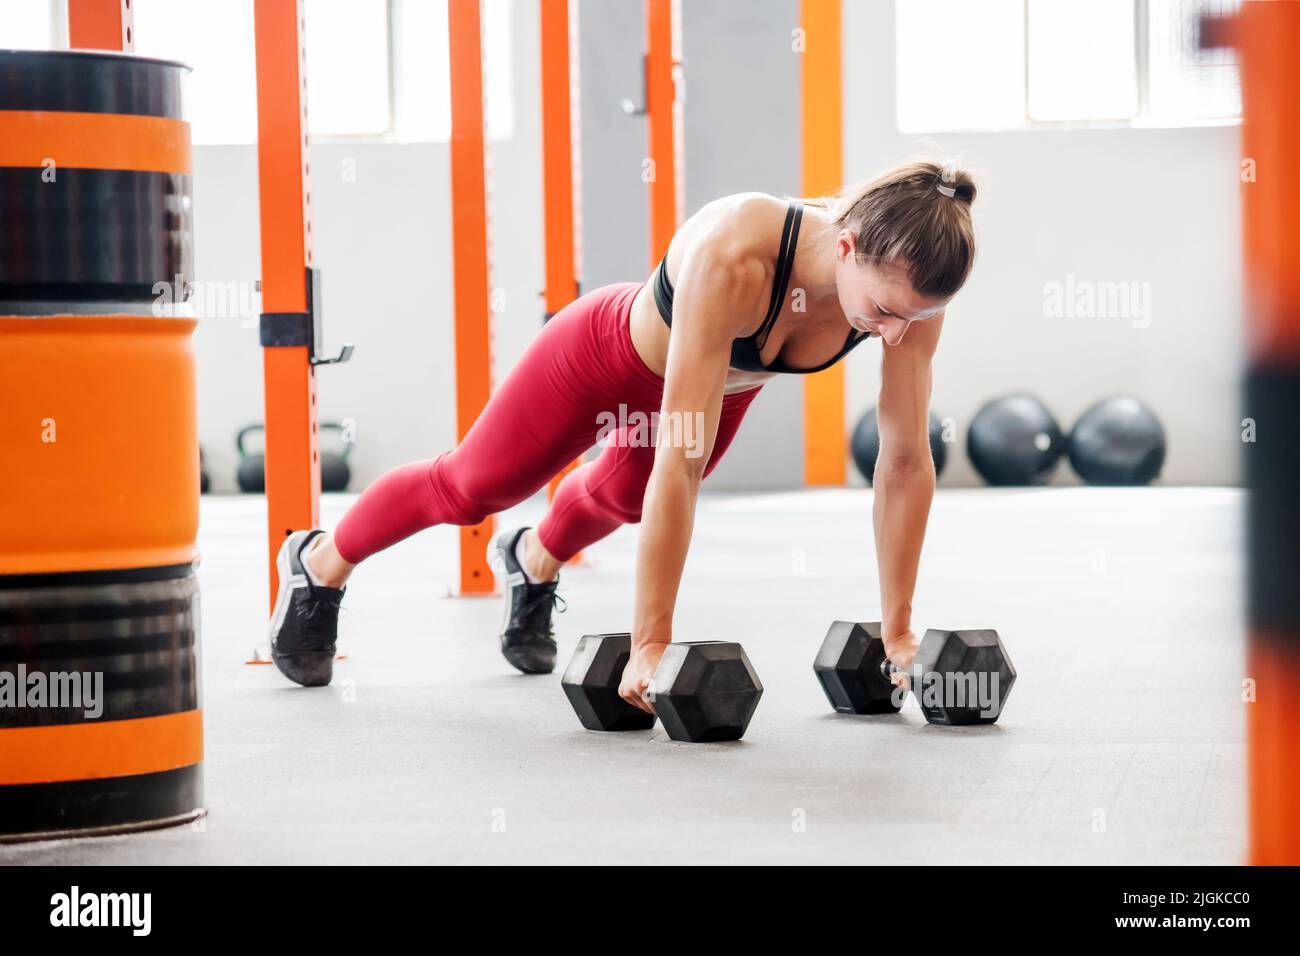 Strong sportswoman in activewear with ponytail doing plank with dumbbells during functional training in spacious light gym Stock Photo